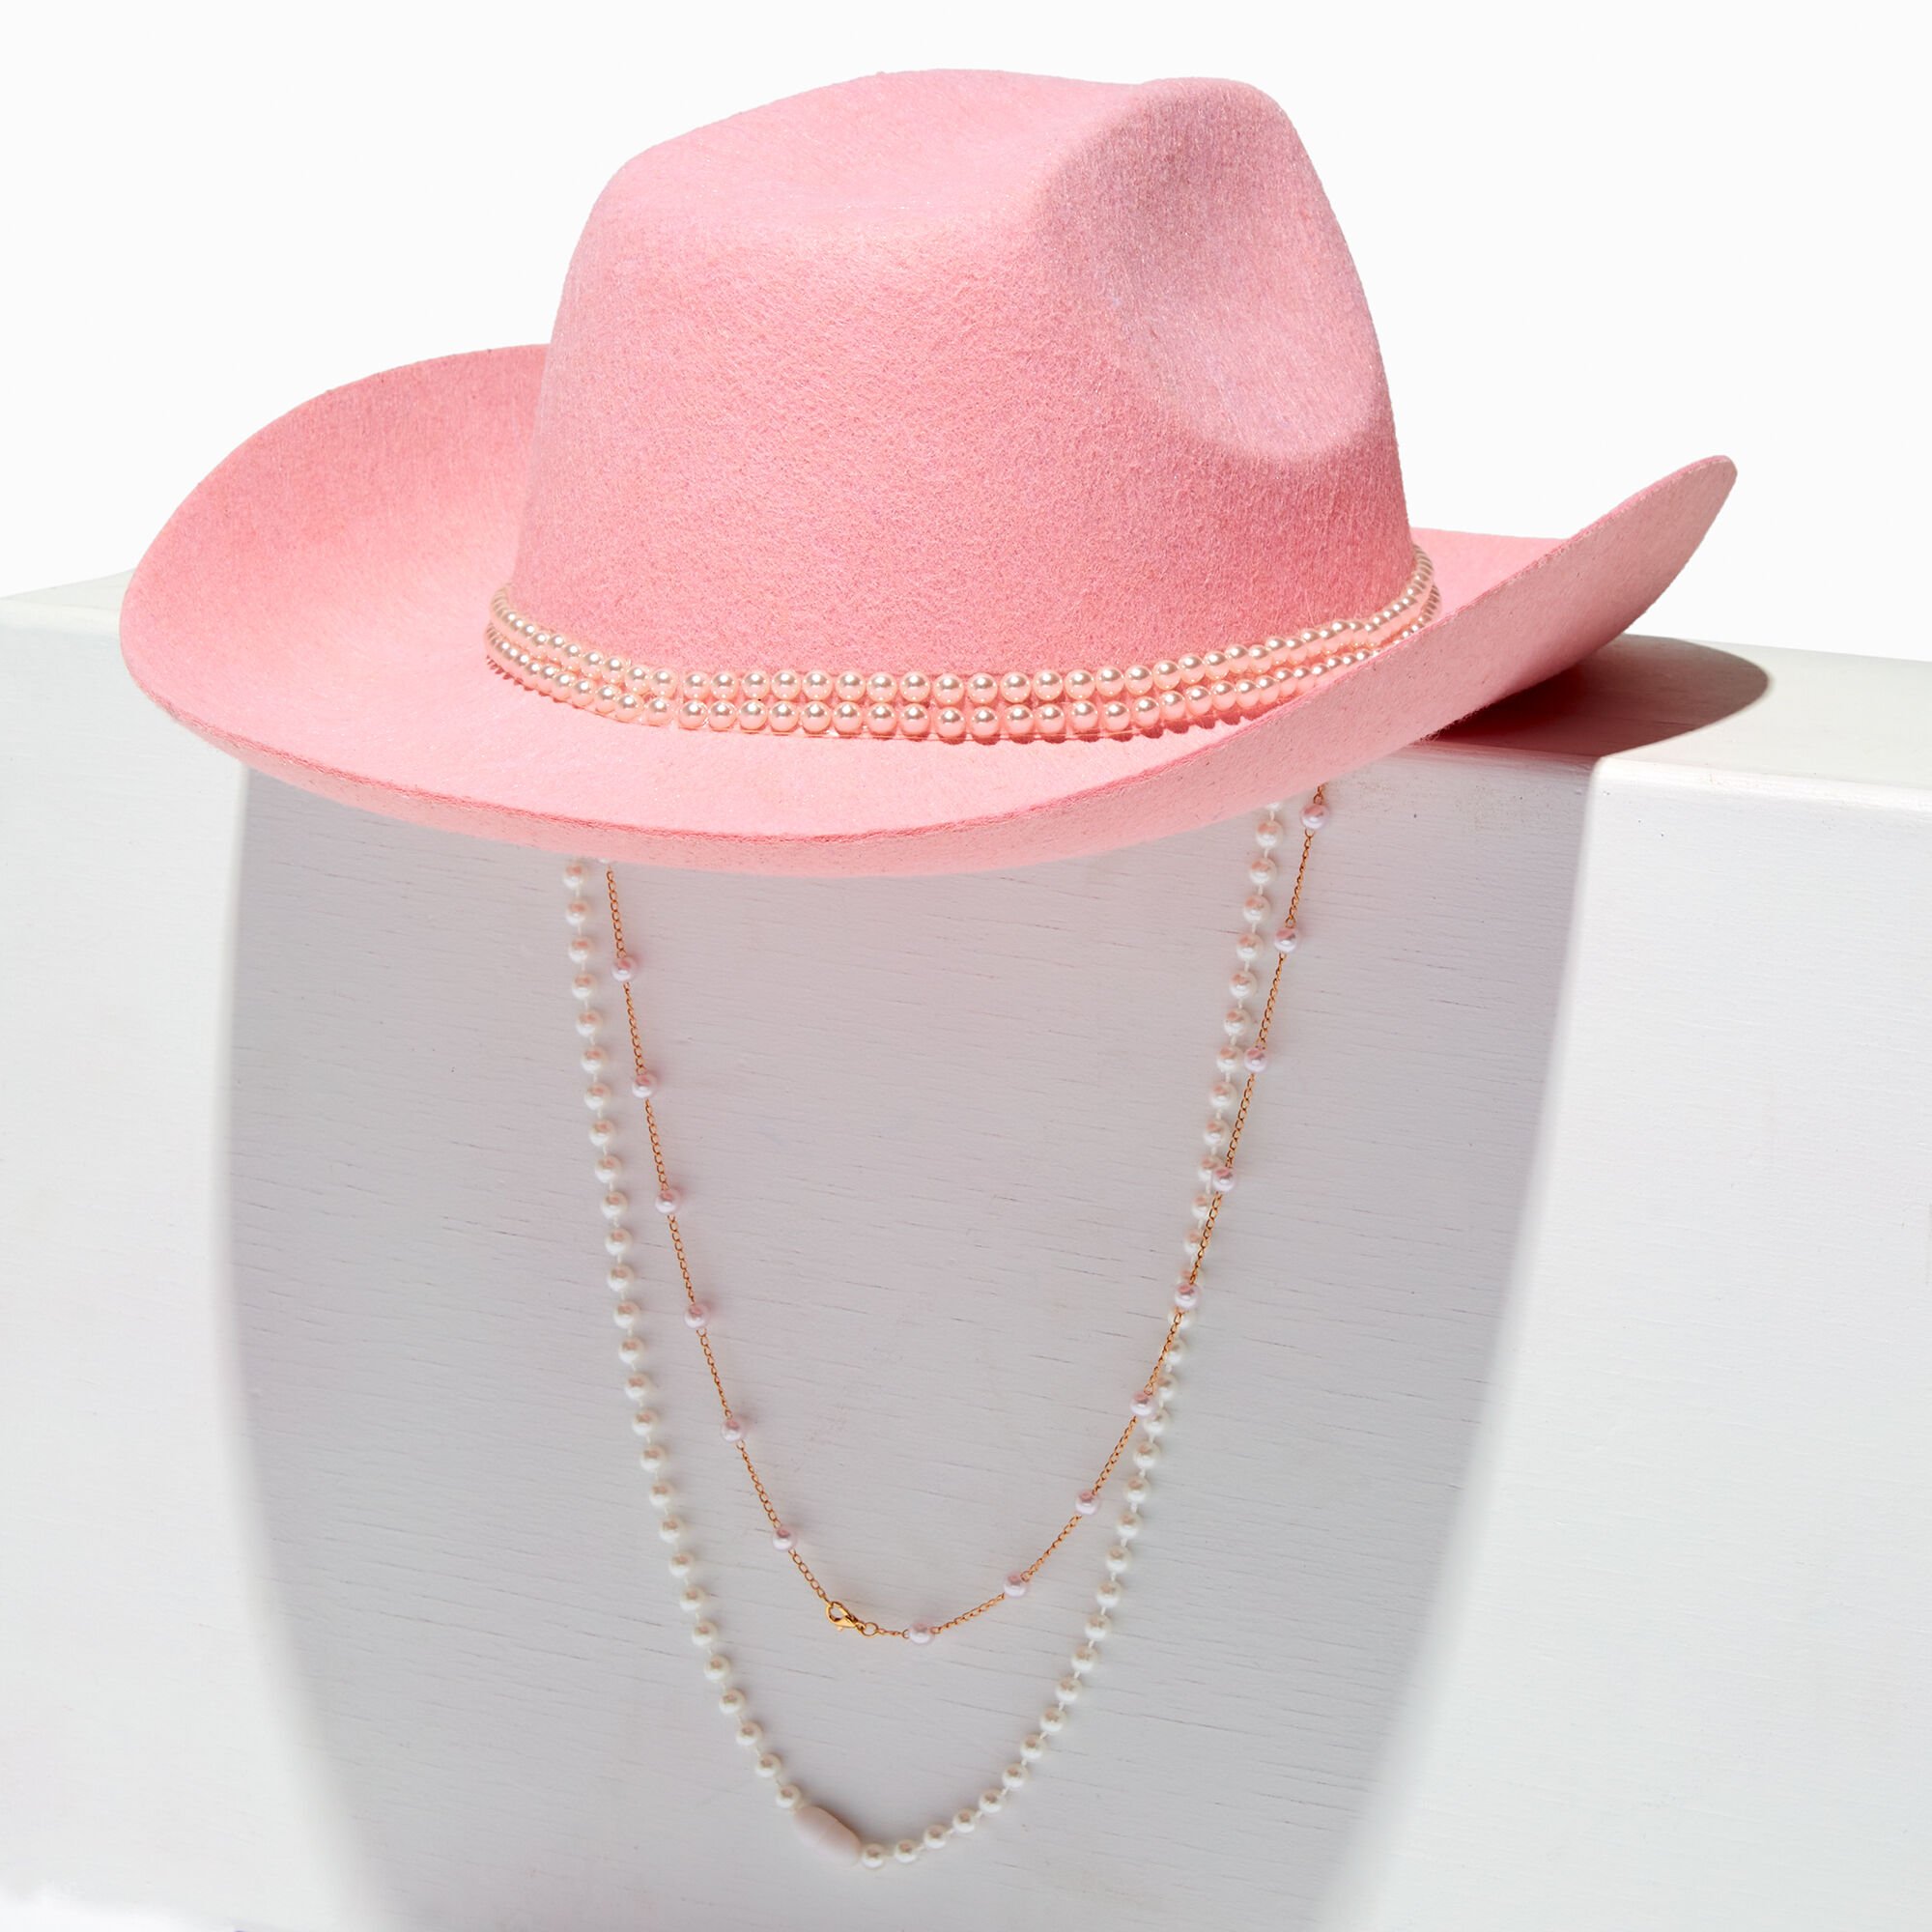 View Claires Pearl Blush Cowboy Hat Pink information